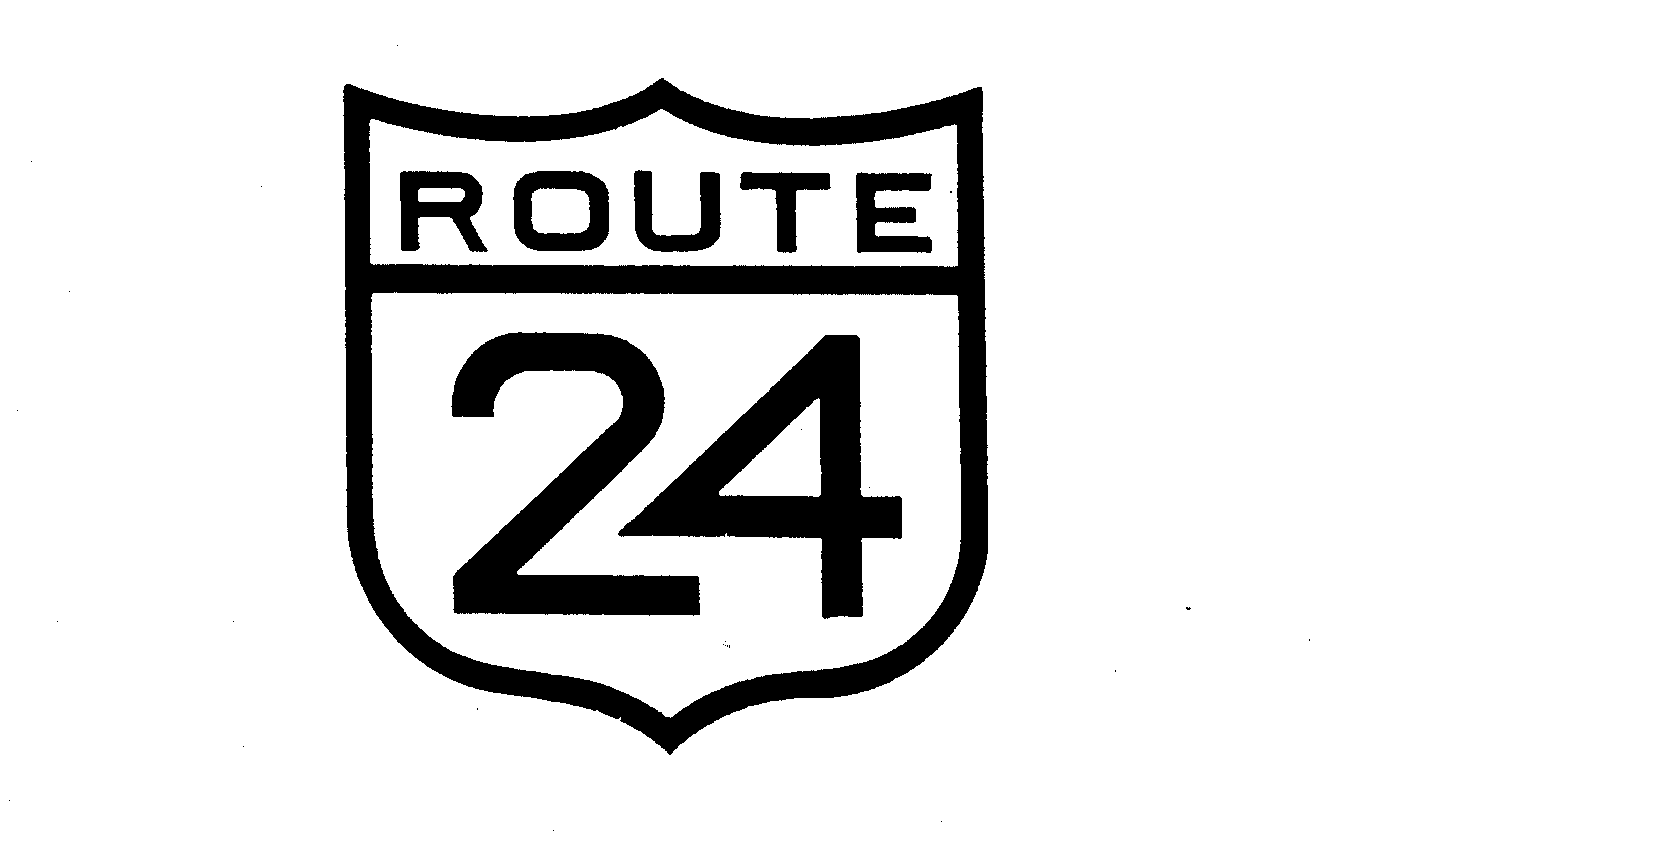  ROUTE 24